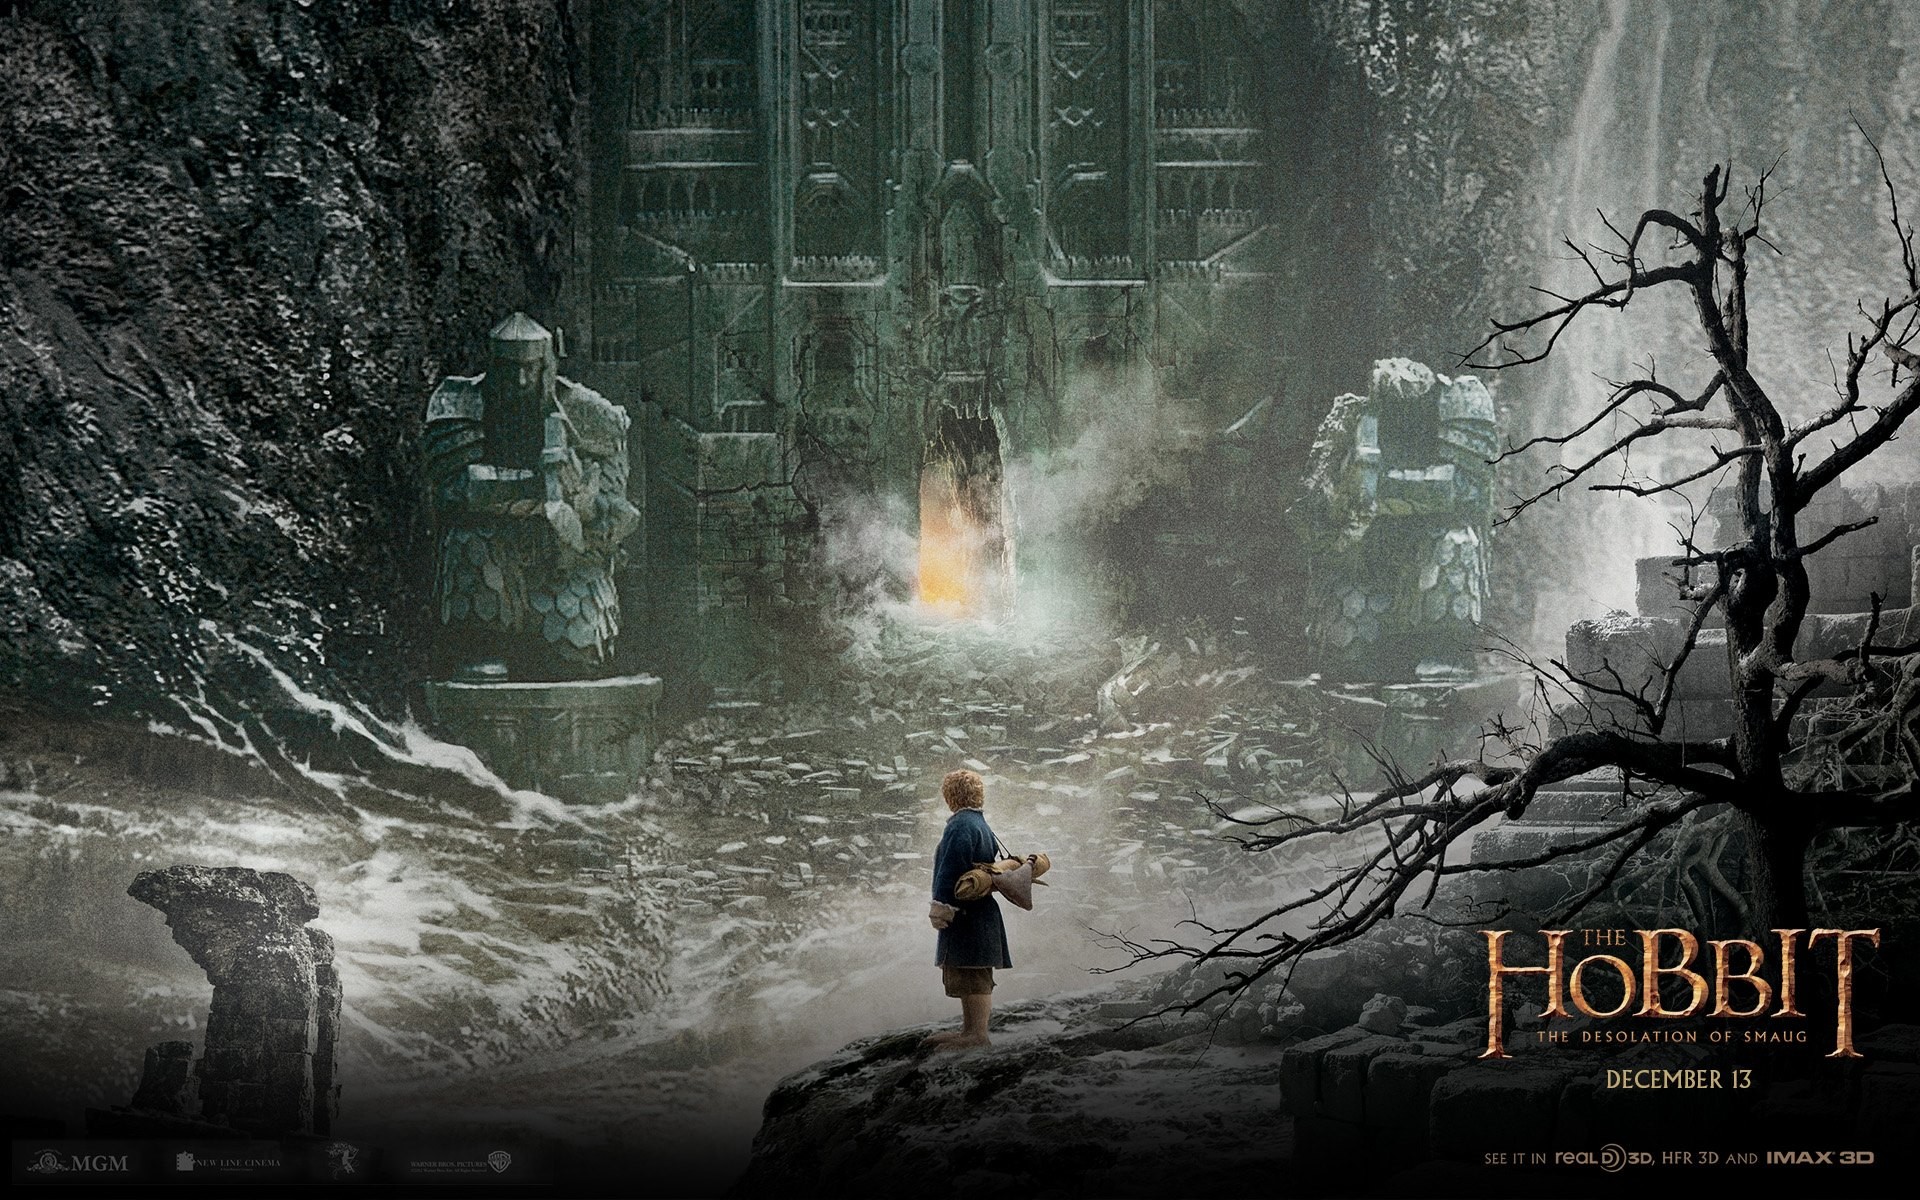 1920x1200 the 4th wallpaper from The Hobbit 2 The Desolation of Smaug is listed below  in HD and wide sizes for set up in phones, tablets and desktop backgrounds